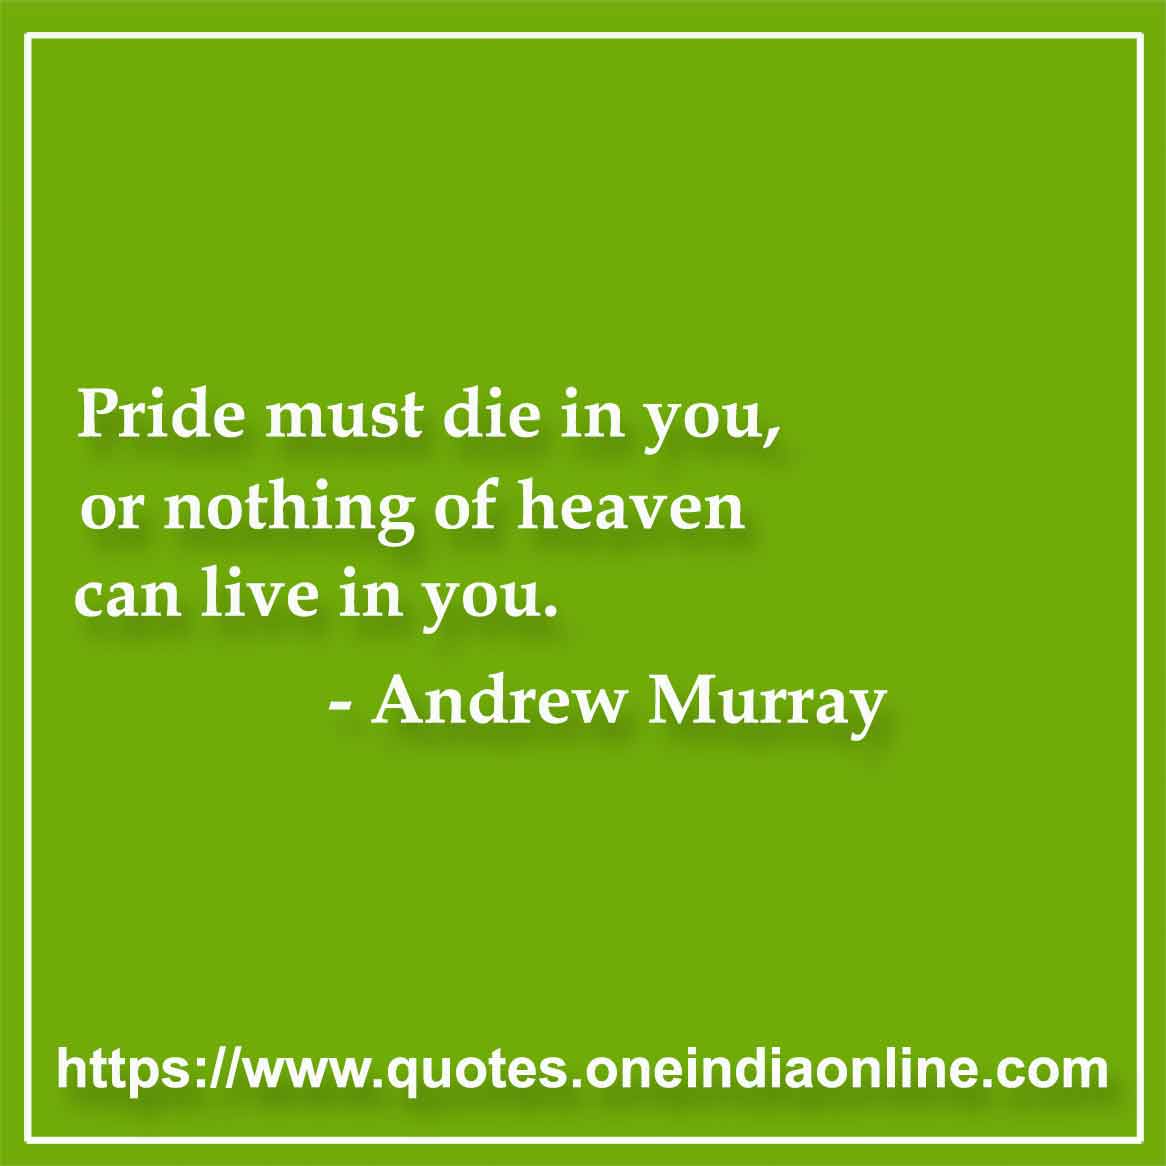 Pride must die in you, or nothing of heaven can live in you. 

- Andrew Murray